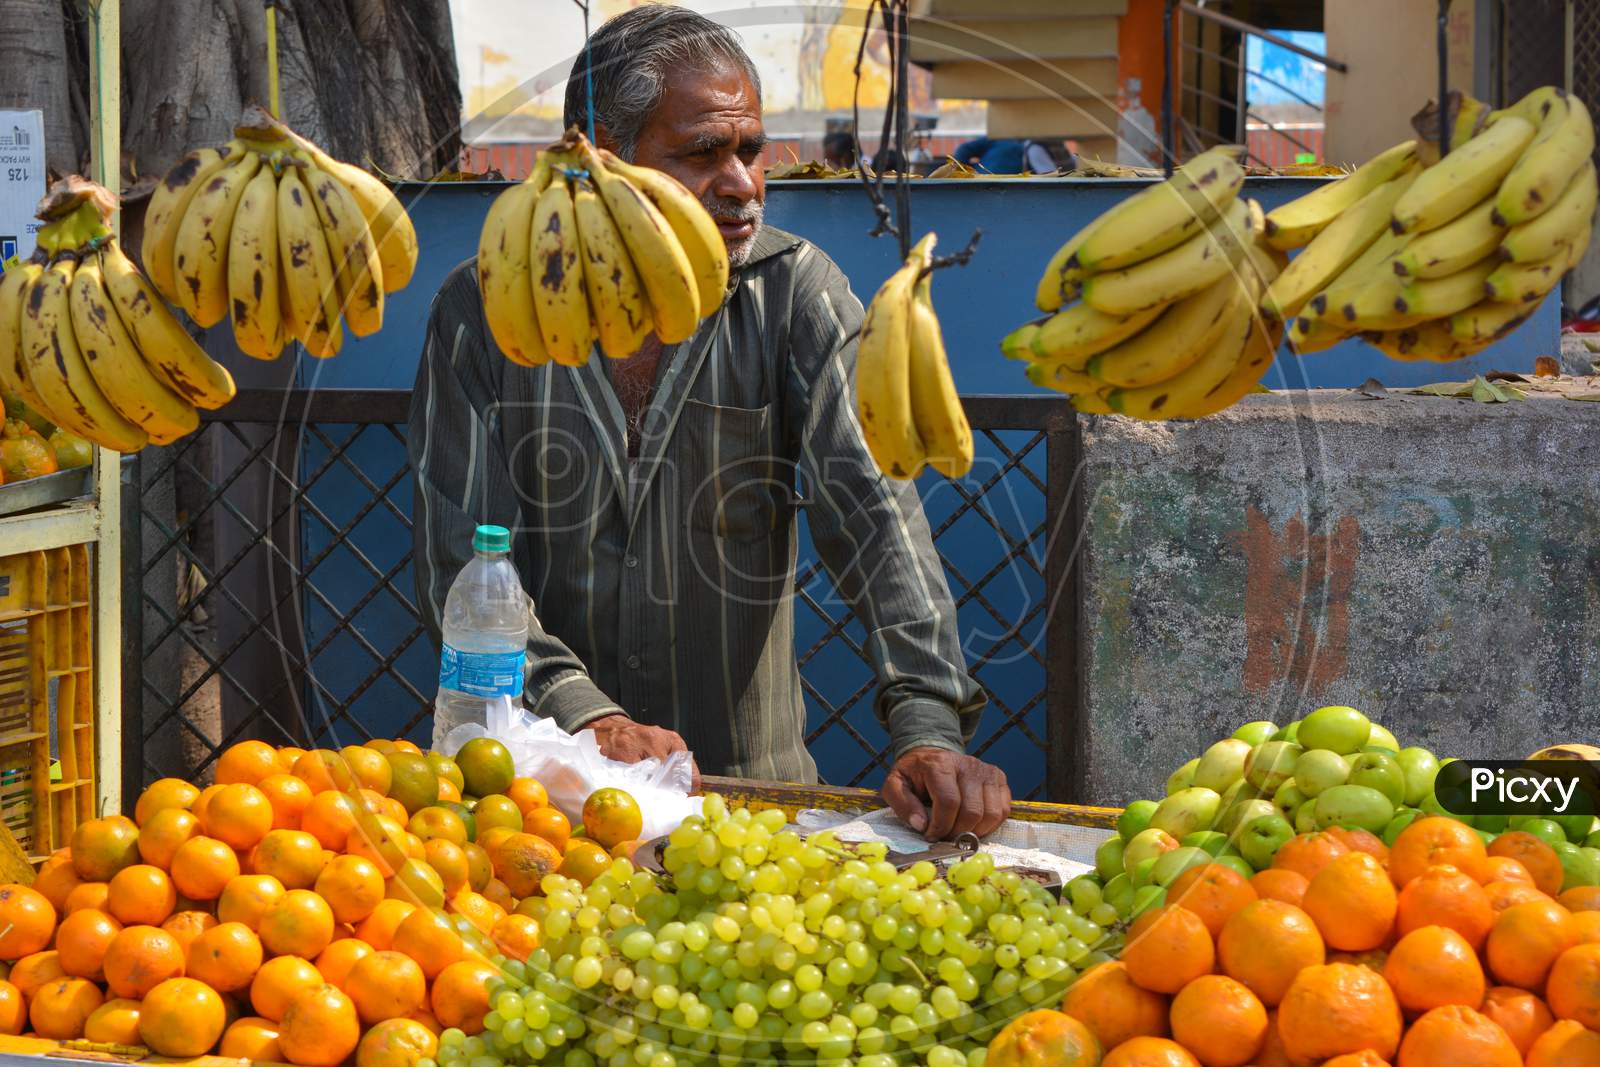 ORCHHA, MADHYA PRADESH, INDIA - MARCH 05, 2020: Unidentified vendor selling fruits on roadside in India.